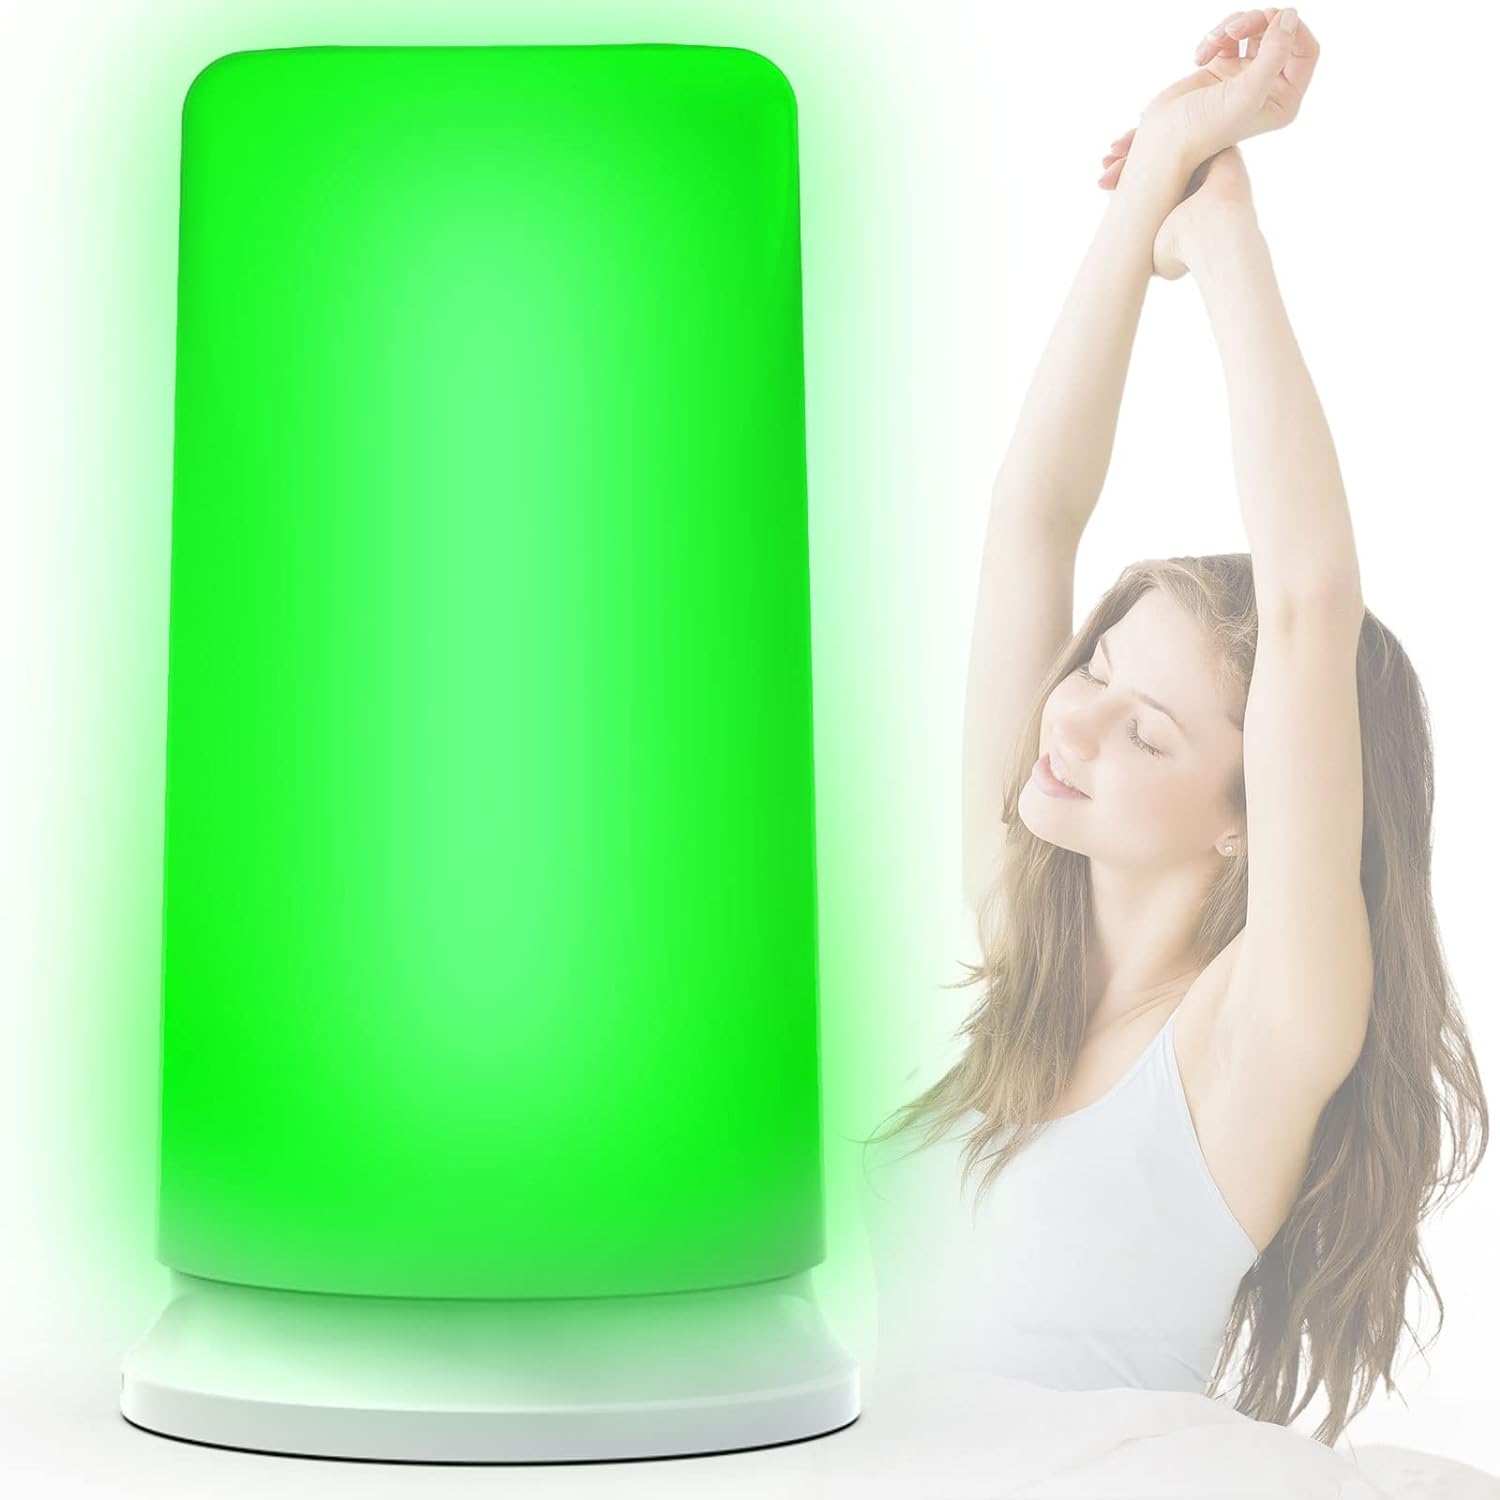 KTS® Emotional Light Therapy Lamp